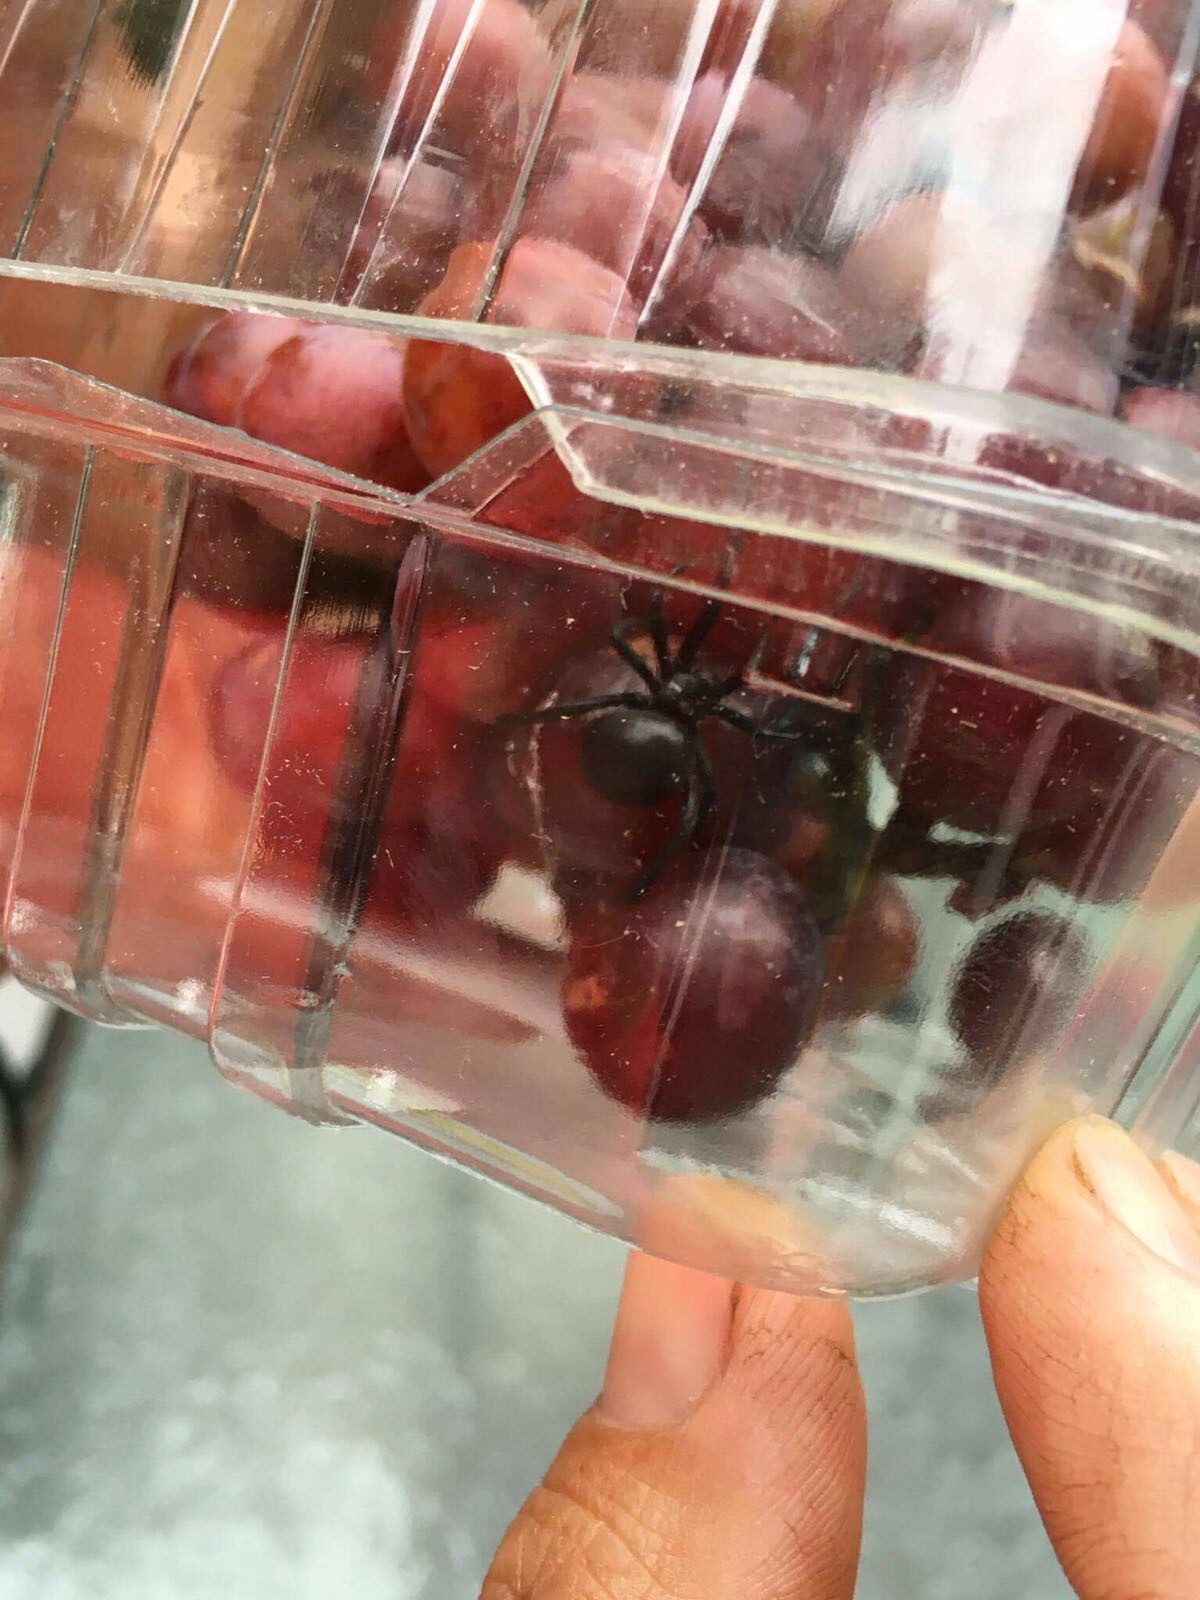 PHOTO: A family from Fremont, New Hampshire, said they found a spider they believed to be a black widow inside a container of organic grapes they said they bought from a local grocery store on July 10, 2016. 